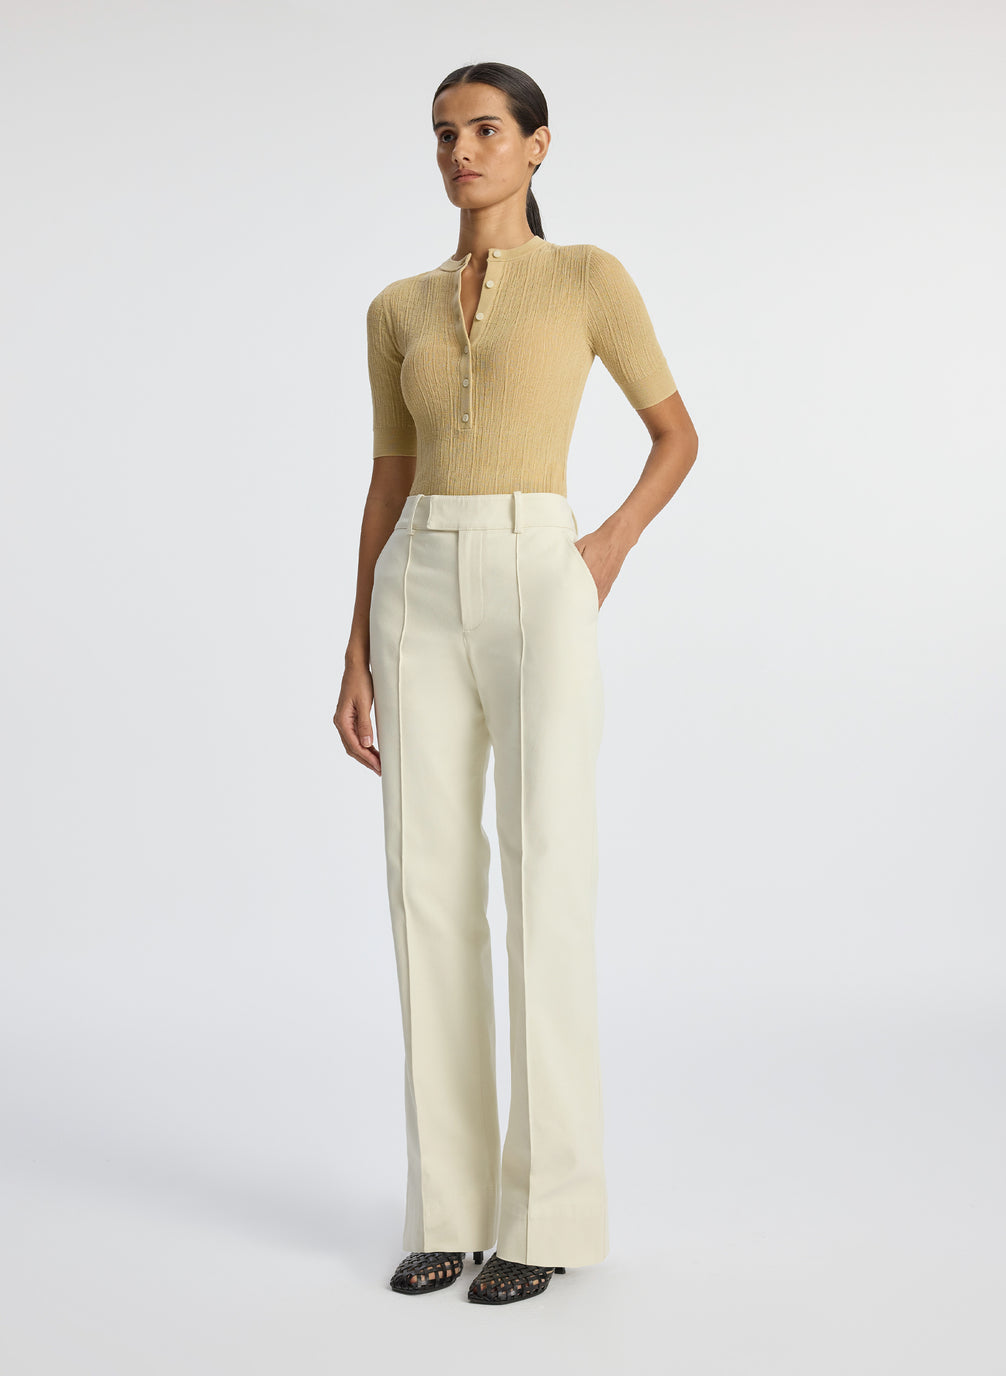 side  view of woman wearing beige half sleeve button placket shirt and cream pants